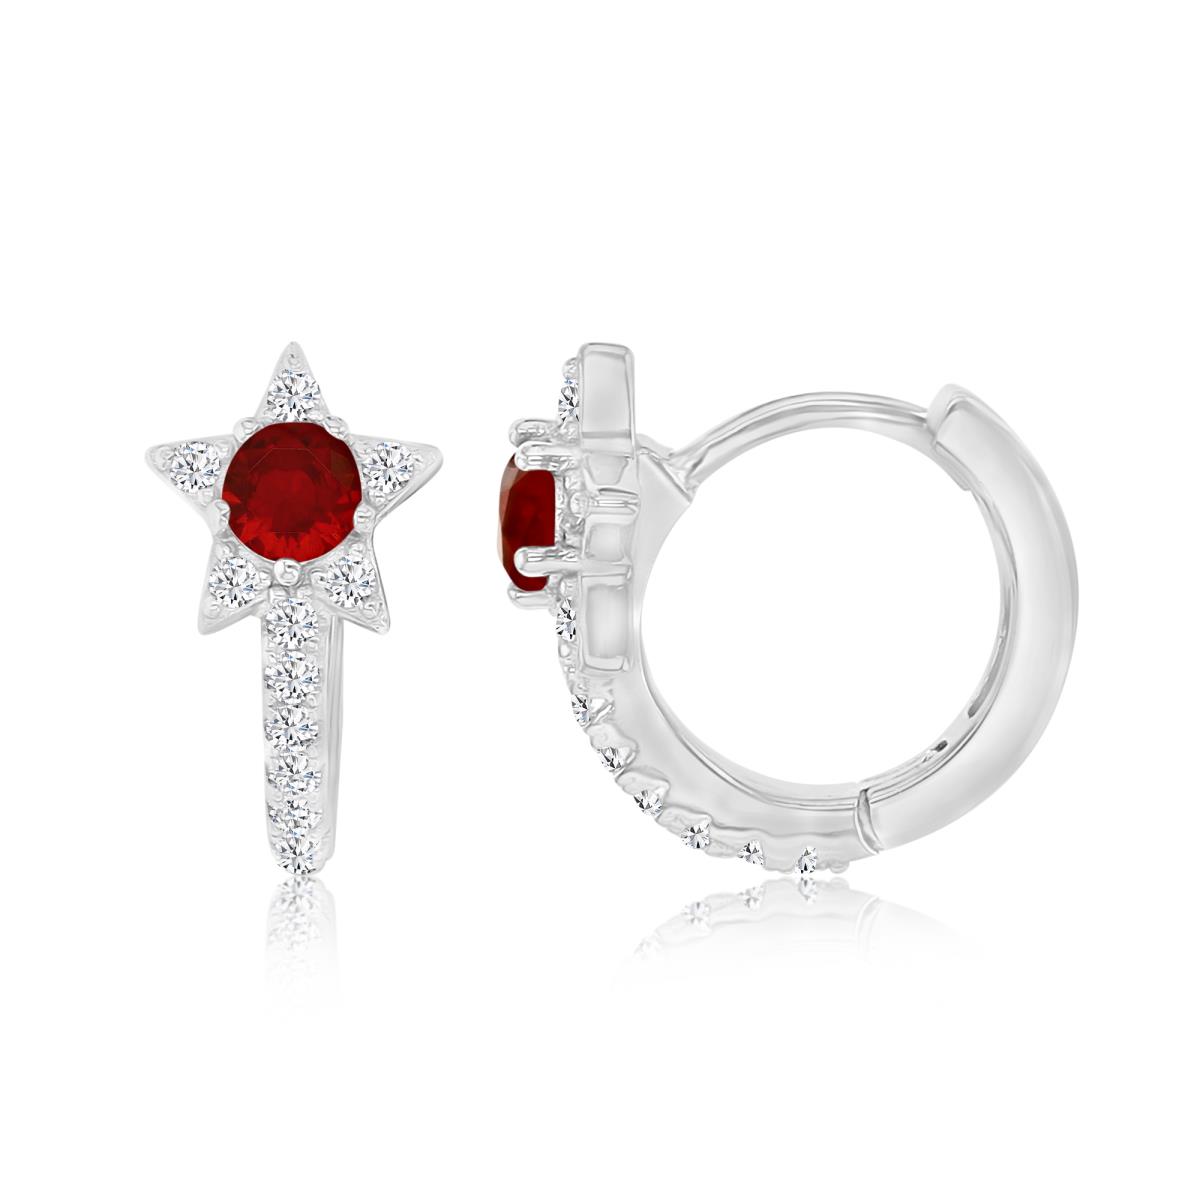 Sterling Silver Rhodium 14X8MM Polished Cr Ruby & Cr White Sapphire Star Huggie Earrings